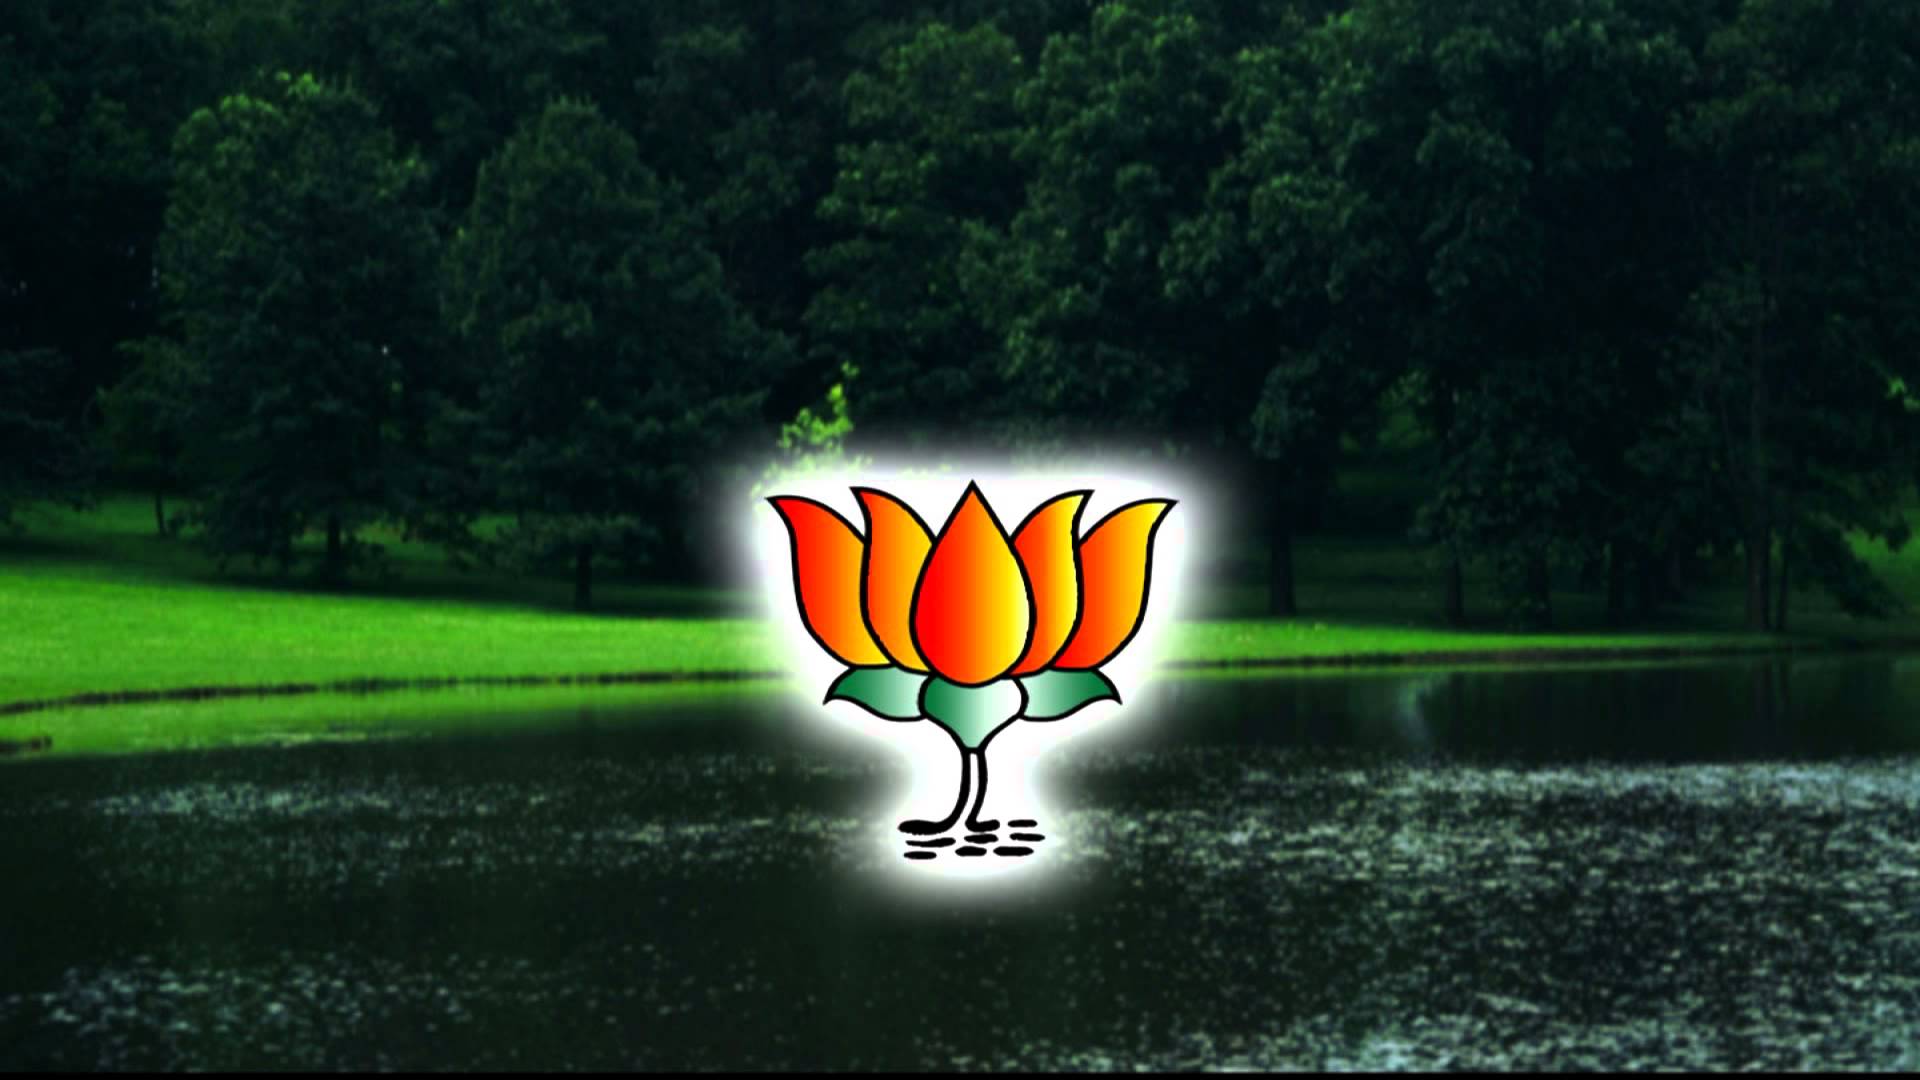 BJP Live Wallpaper for PC - How to Install on Windows PC, Mac